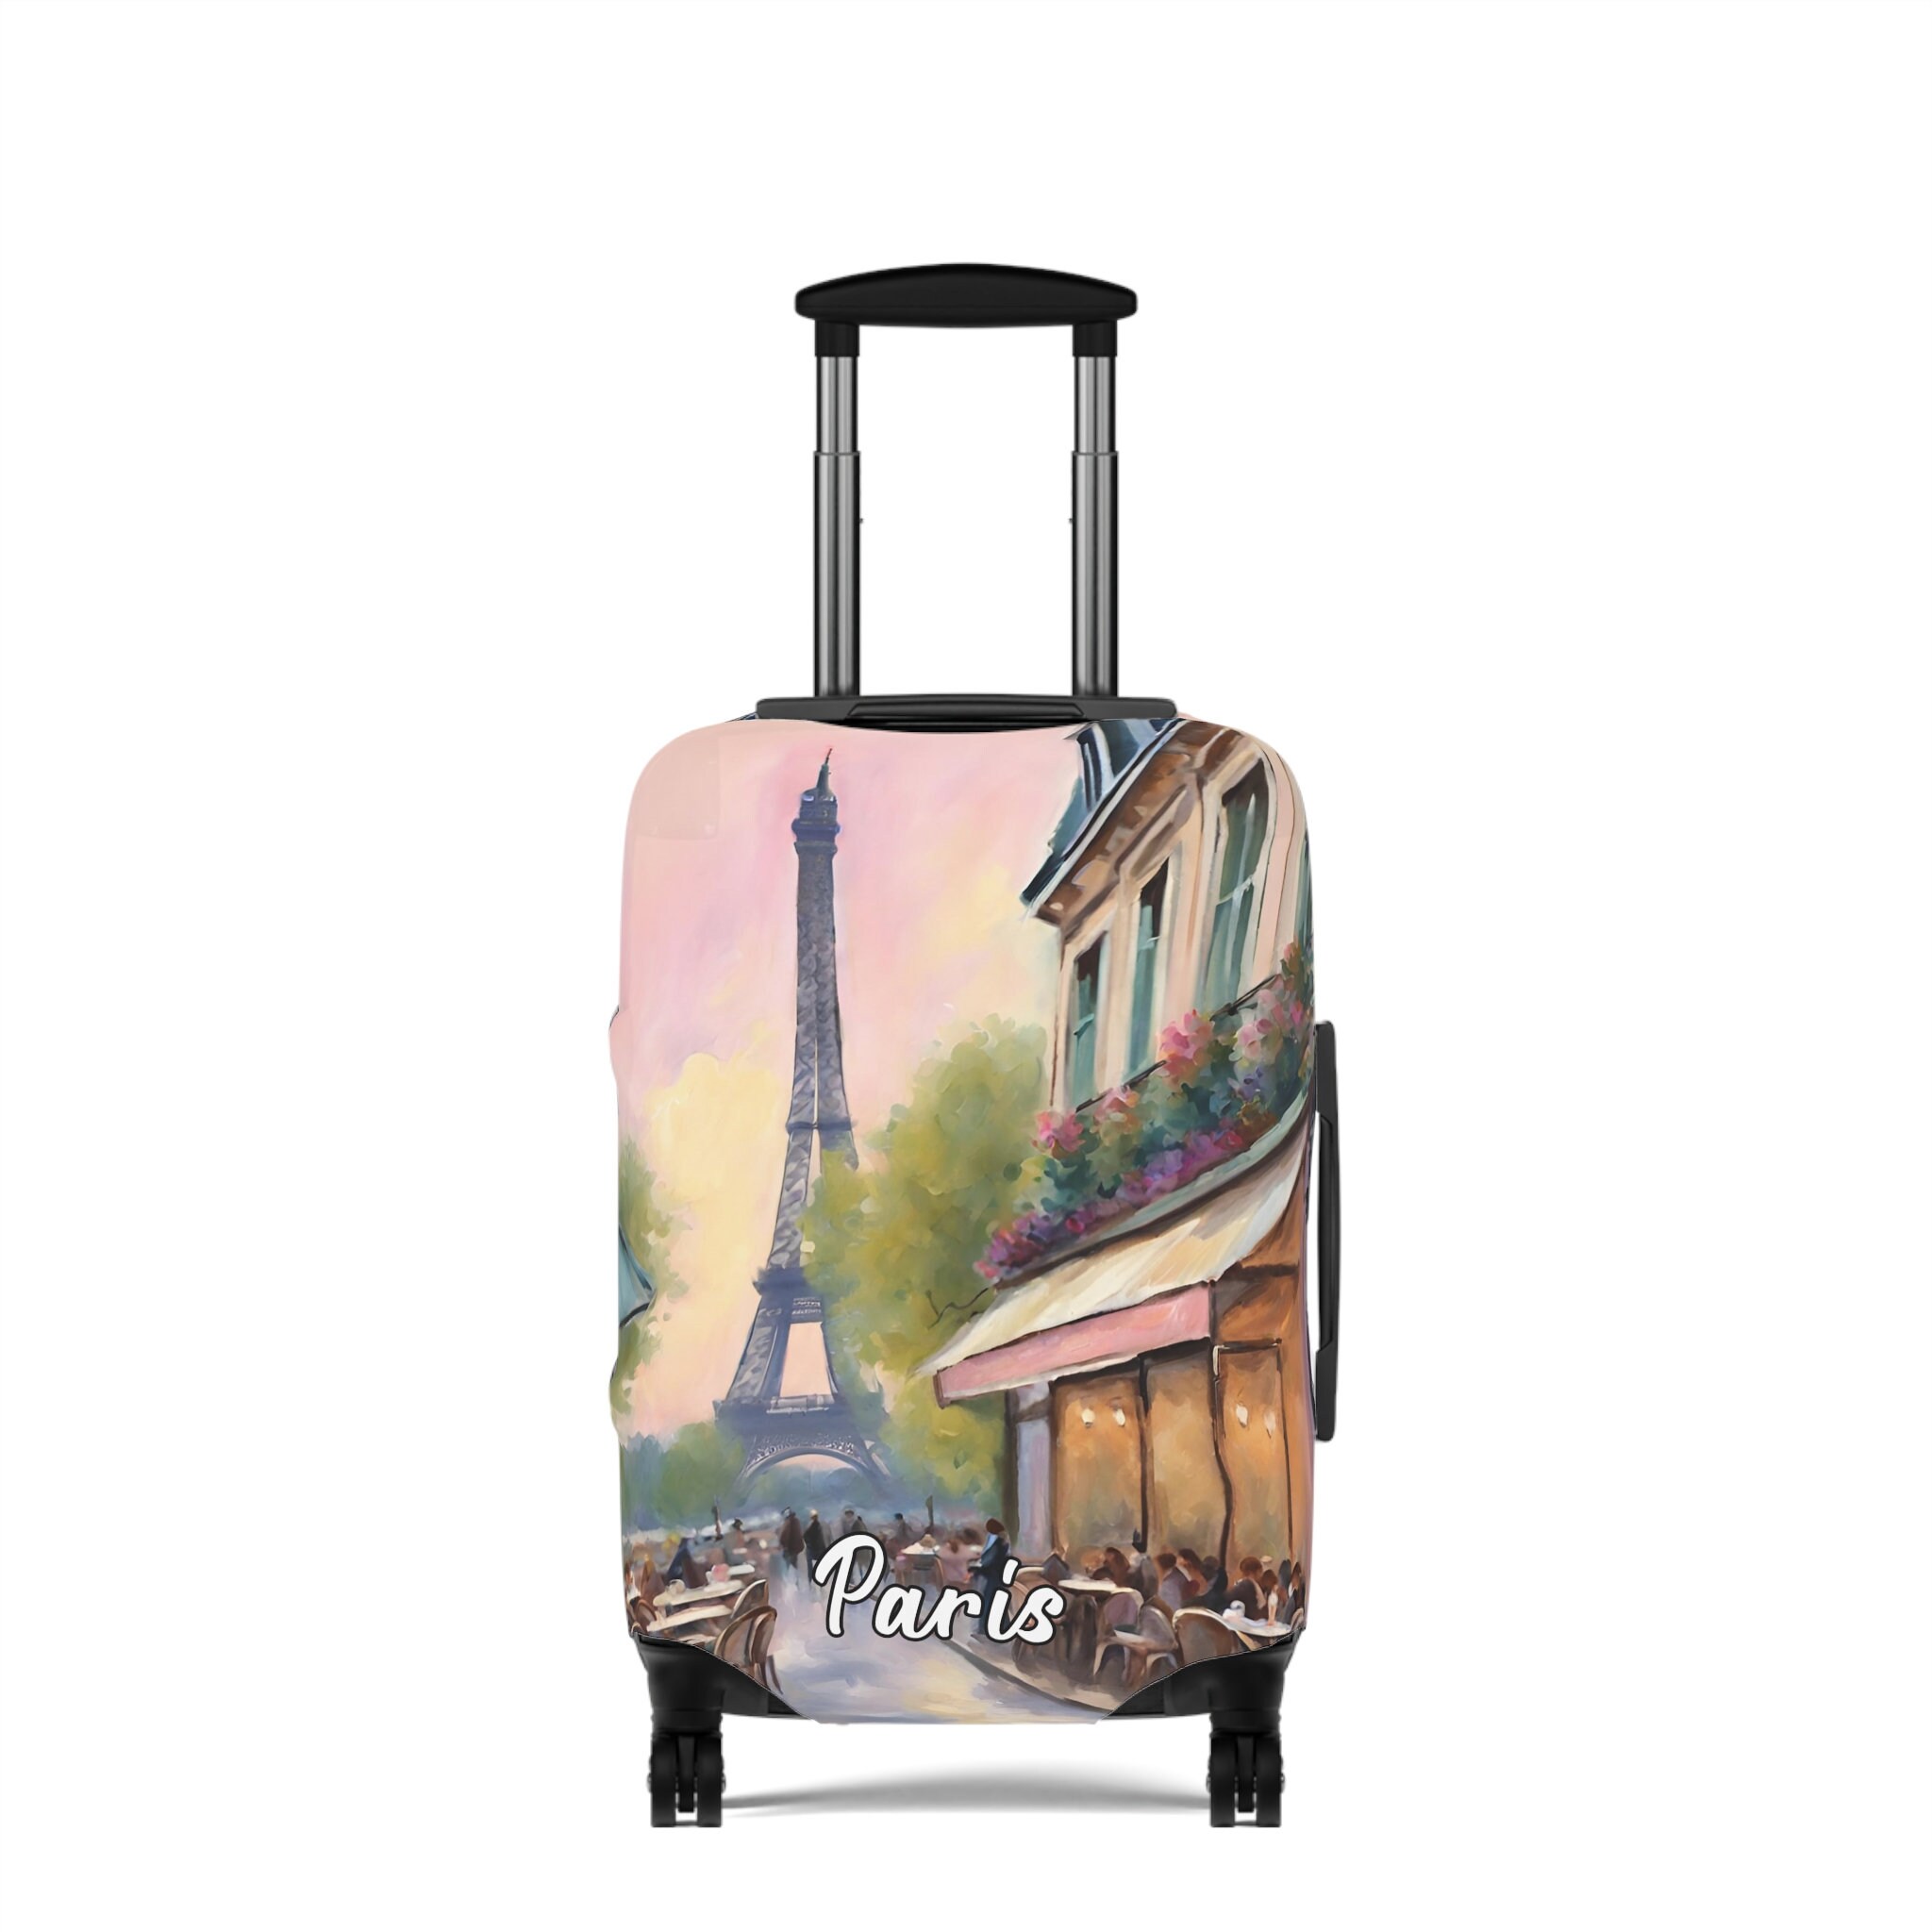 Eiffel Tower Luggage Cover, Unique Luggage Cover